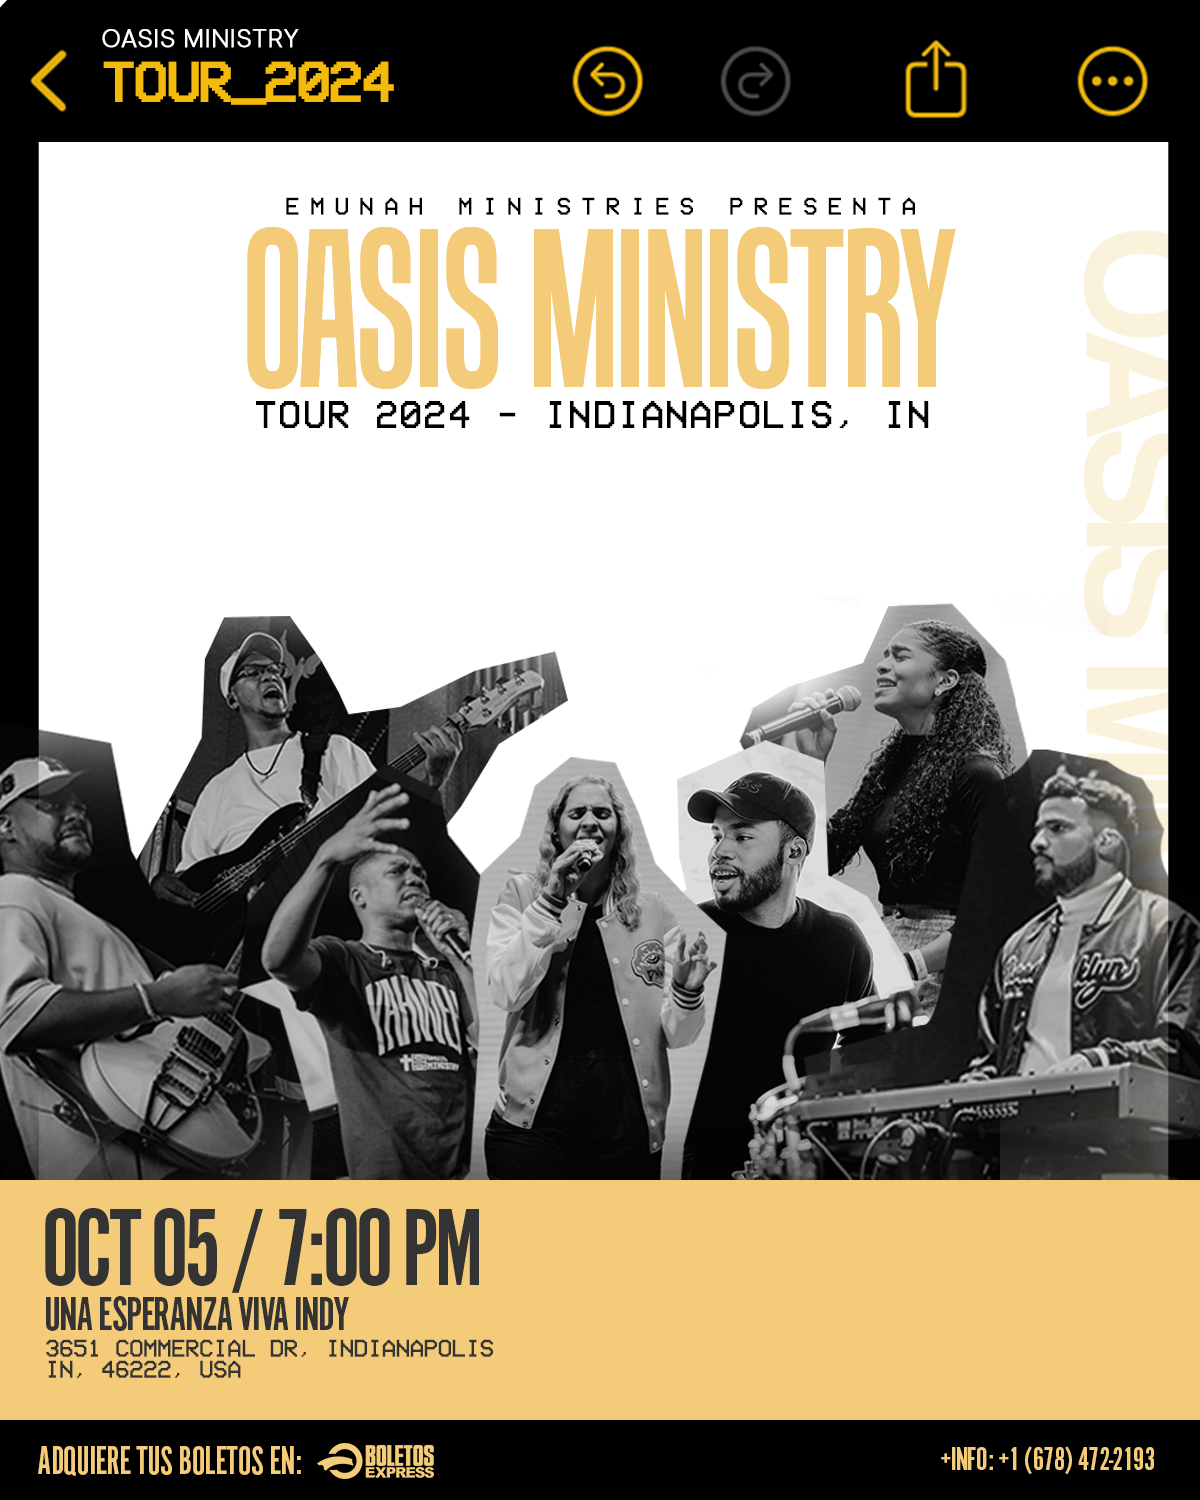 OASIS MINISTRY USA TOUR-INDIANAPOLIS,IN 2024